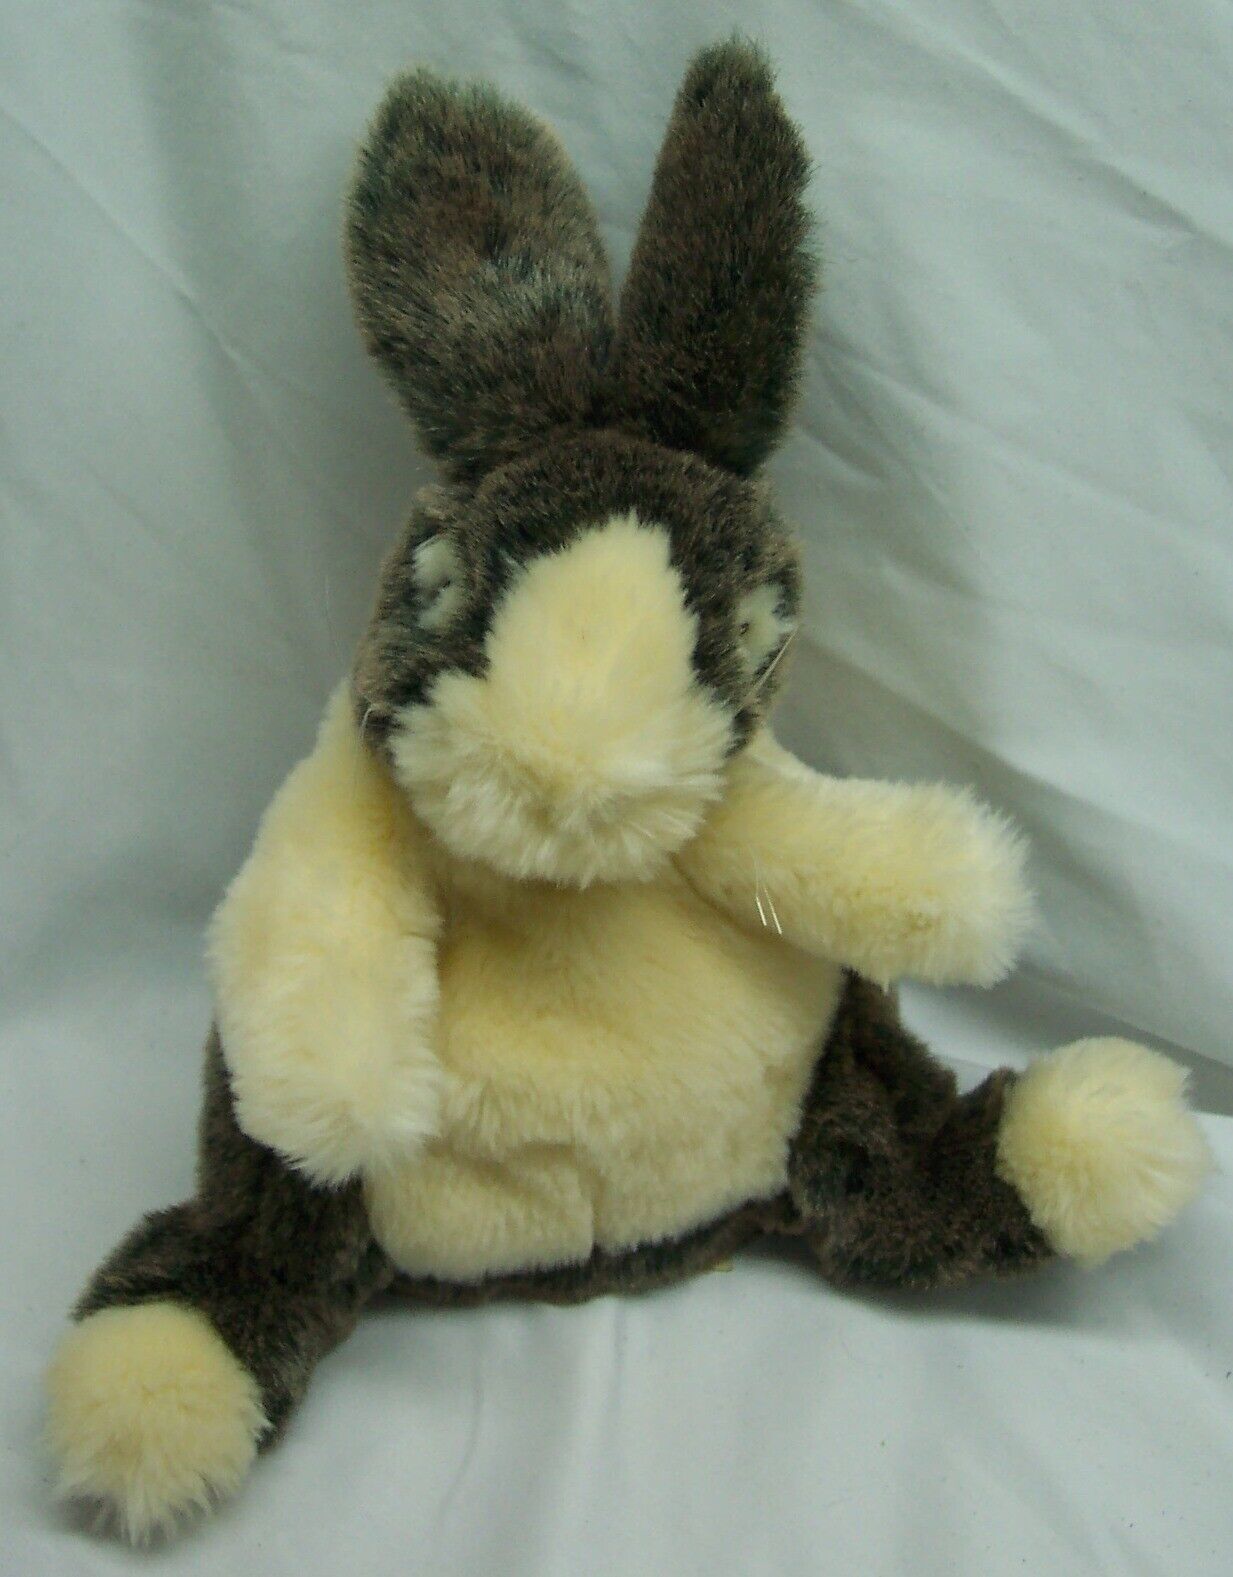 Primary image for Folkmanis CUTE BABY DUTCH BUNNY RABBIT HAND PUPPET 9" Plush STUFFED ANIMAL Toy